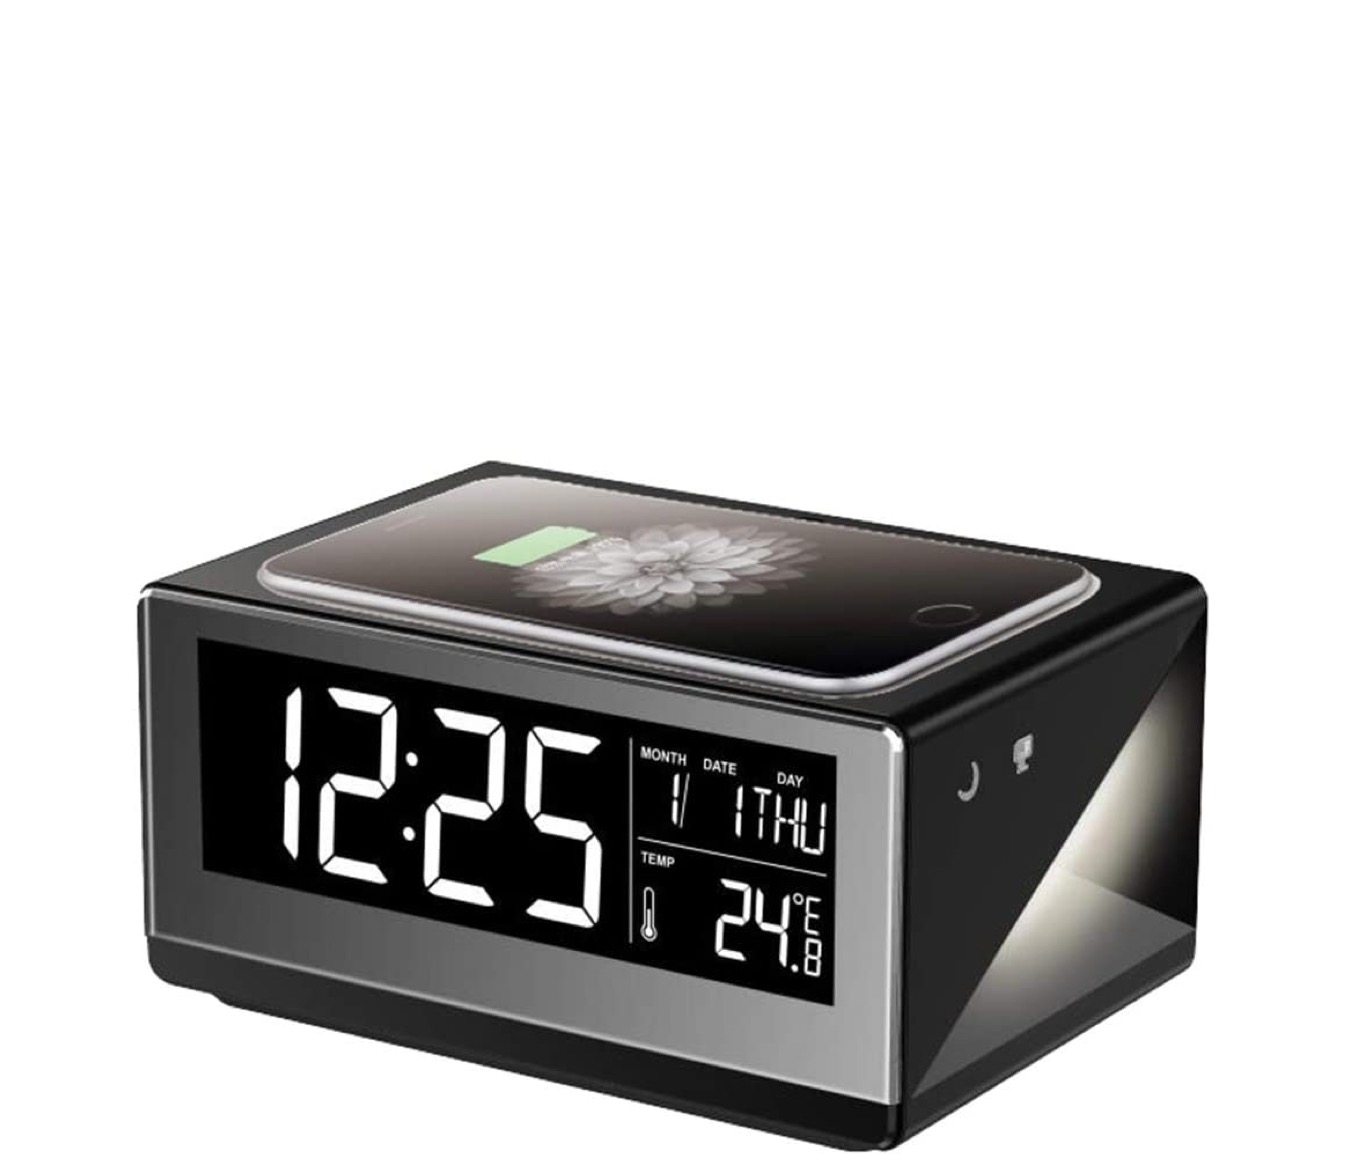 Boytone BT-12B Alarm Clock Fast Wireless Charger for Compatible Smartphone NEW 